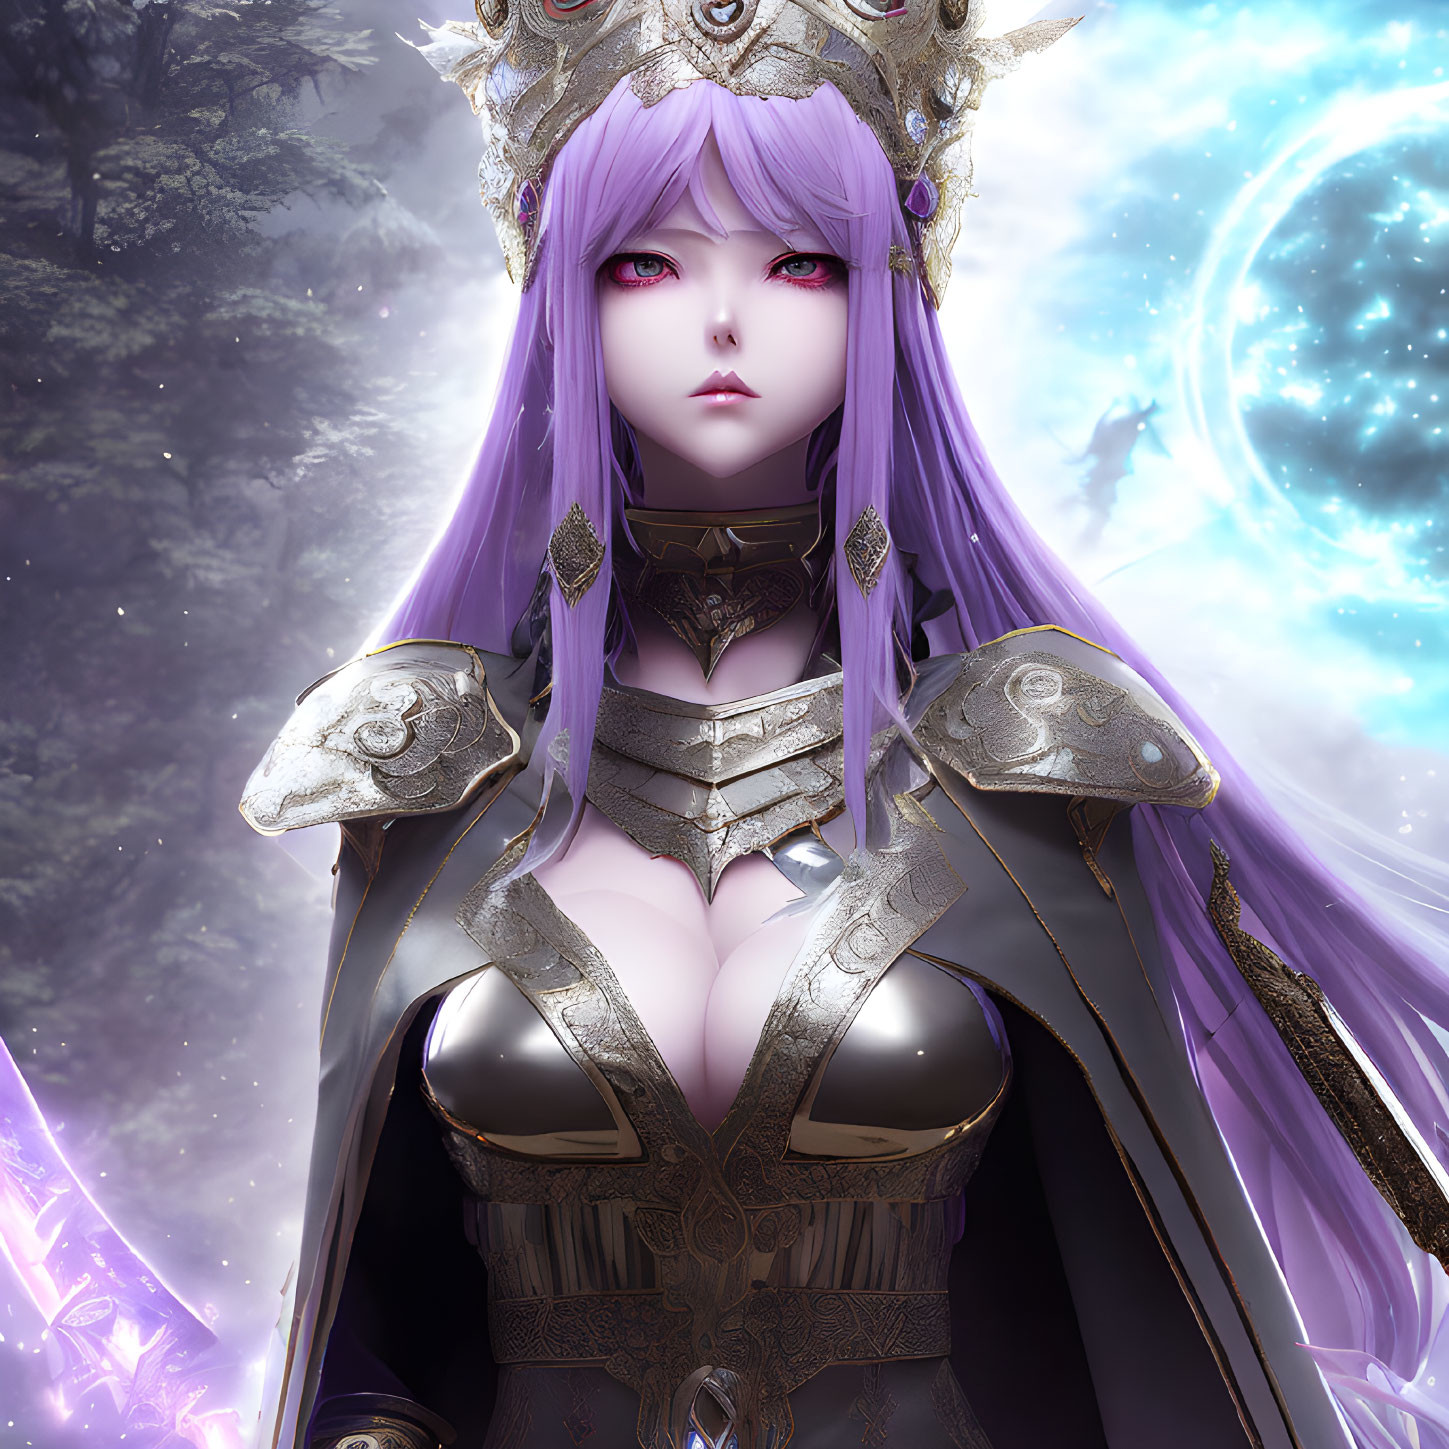 Regal Female Anime Character in Silver Armor with Purple Hair